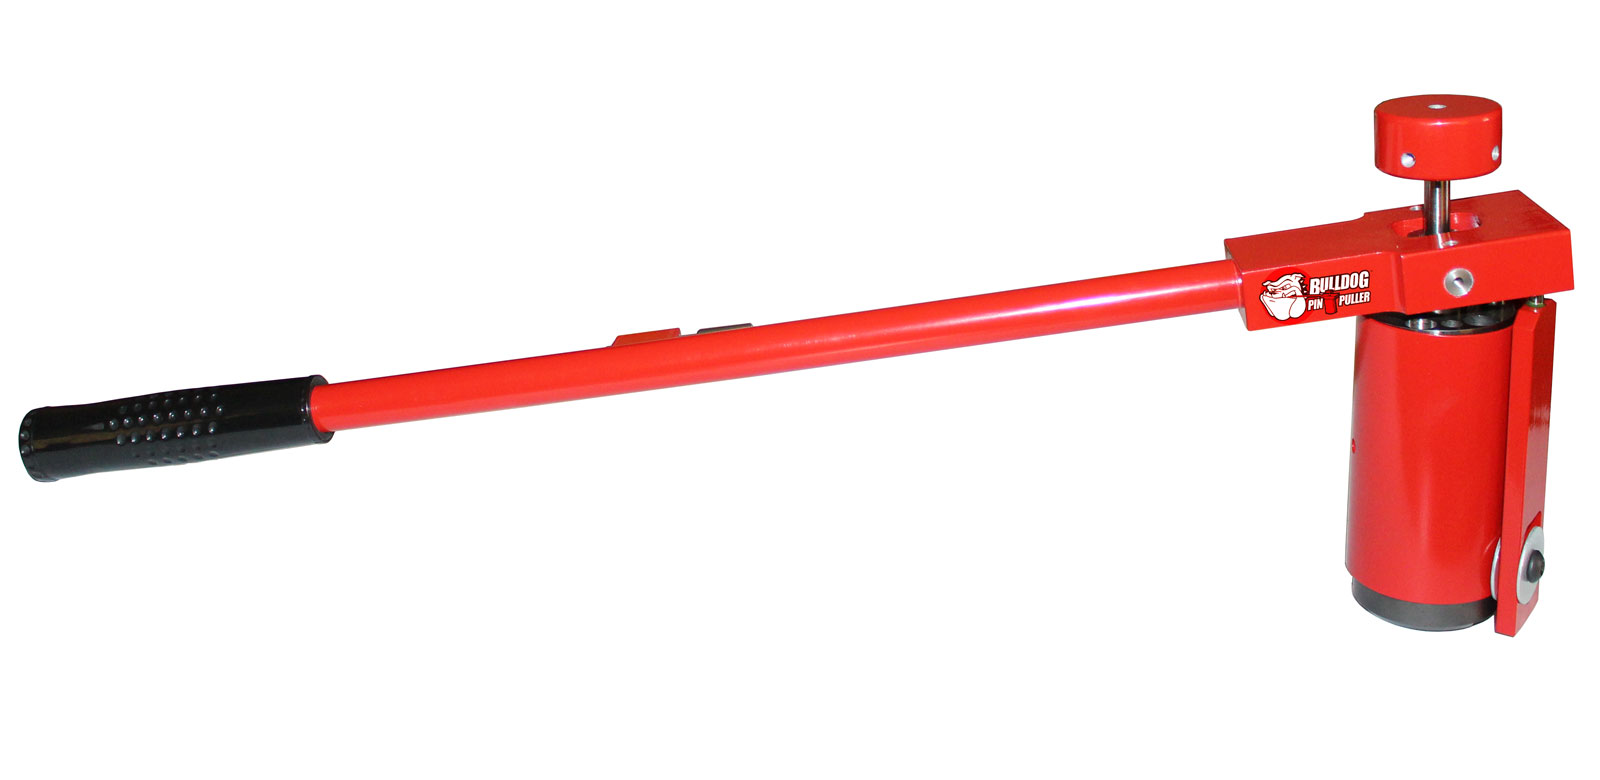 Bulldog Automotive Dowel Pin Puller for Clutches and Engine Blocks